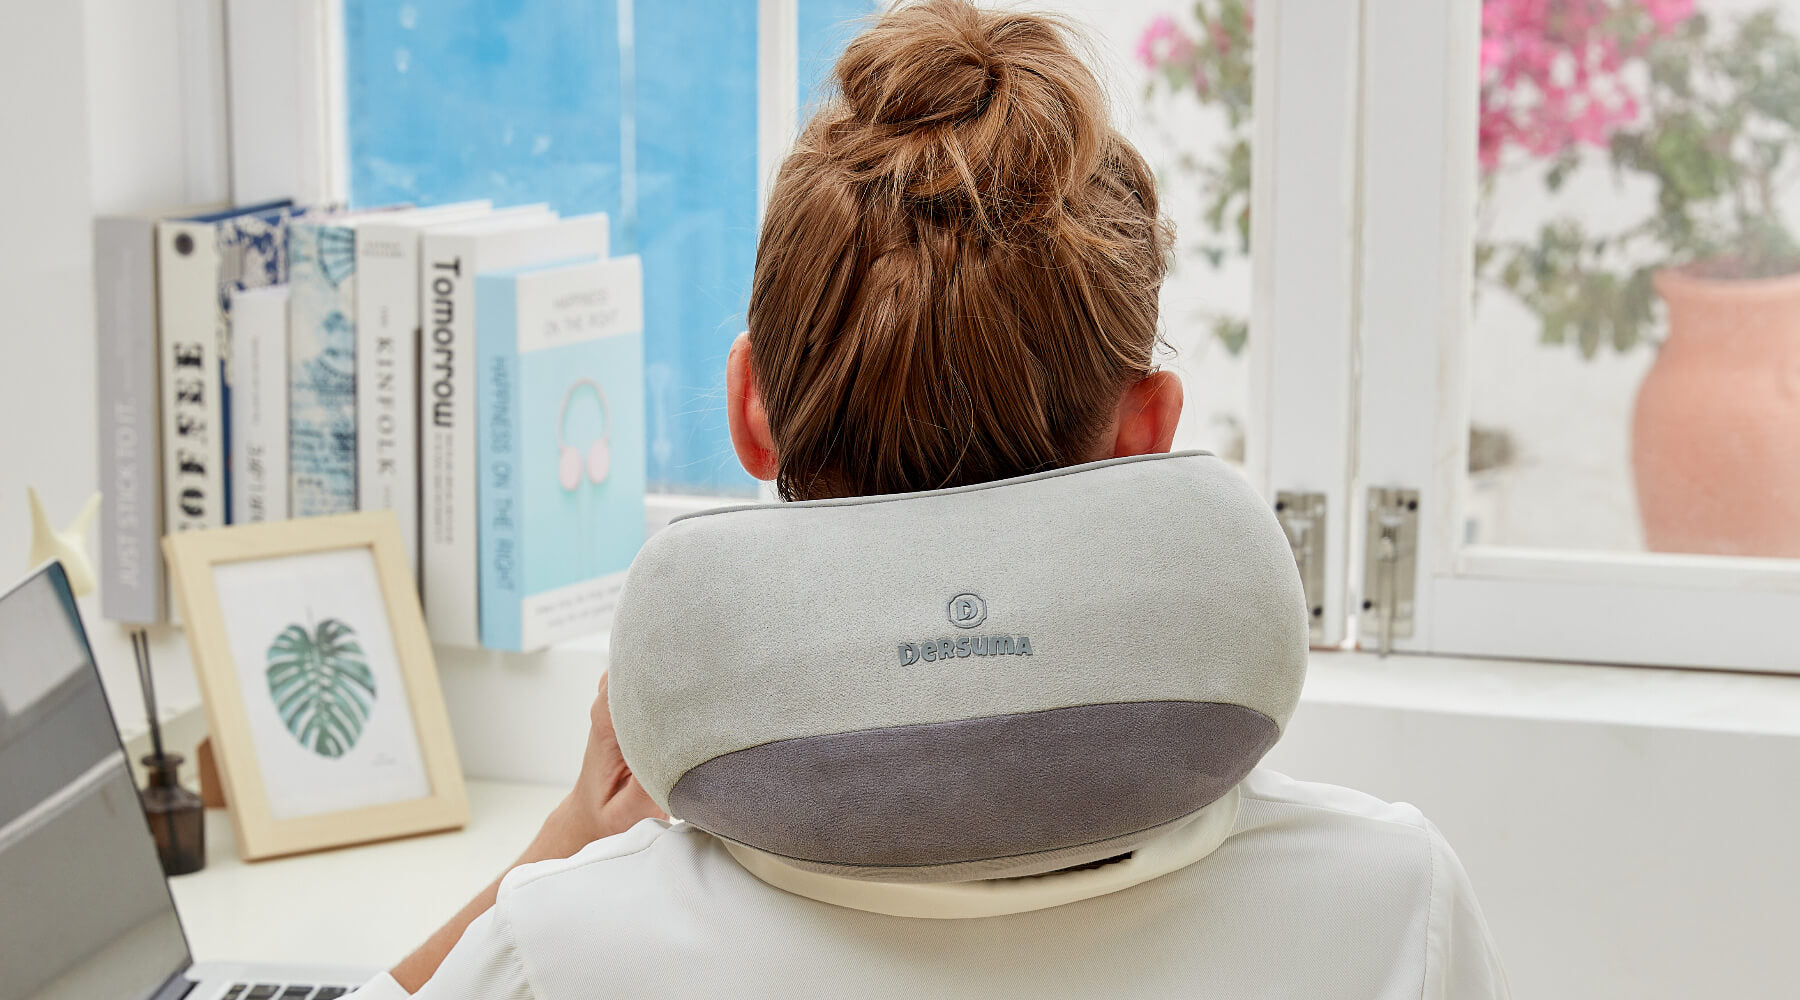 Dersuma heated neck massager customizes relaxation for your whole body: neck, cervical, arms, legs, helps to relief pain.